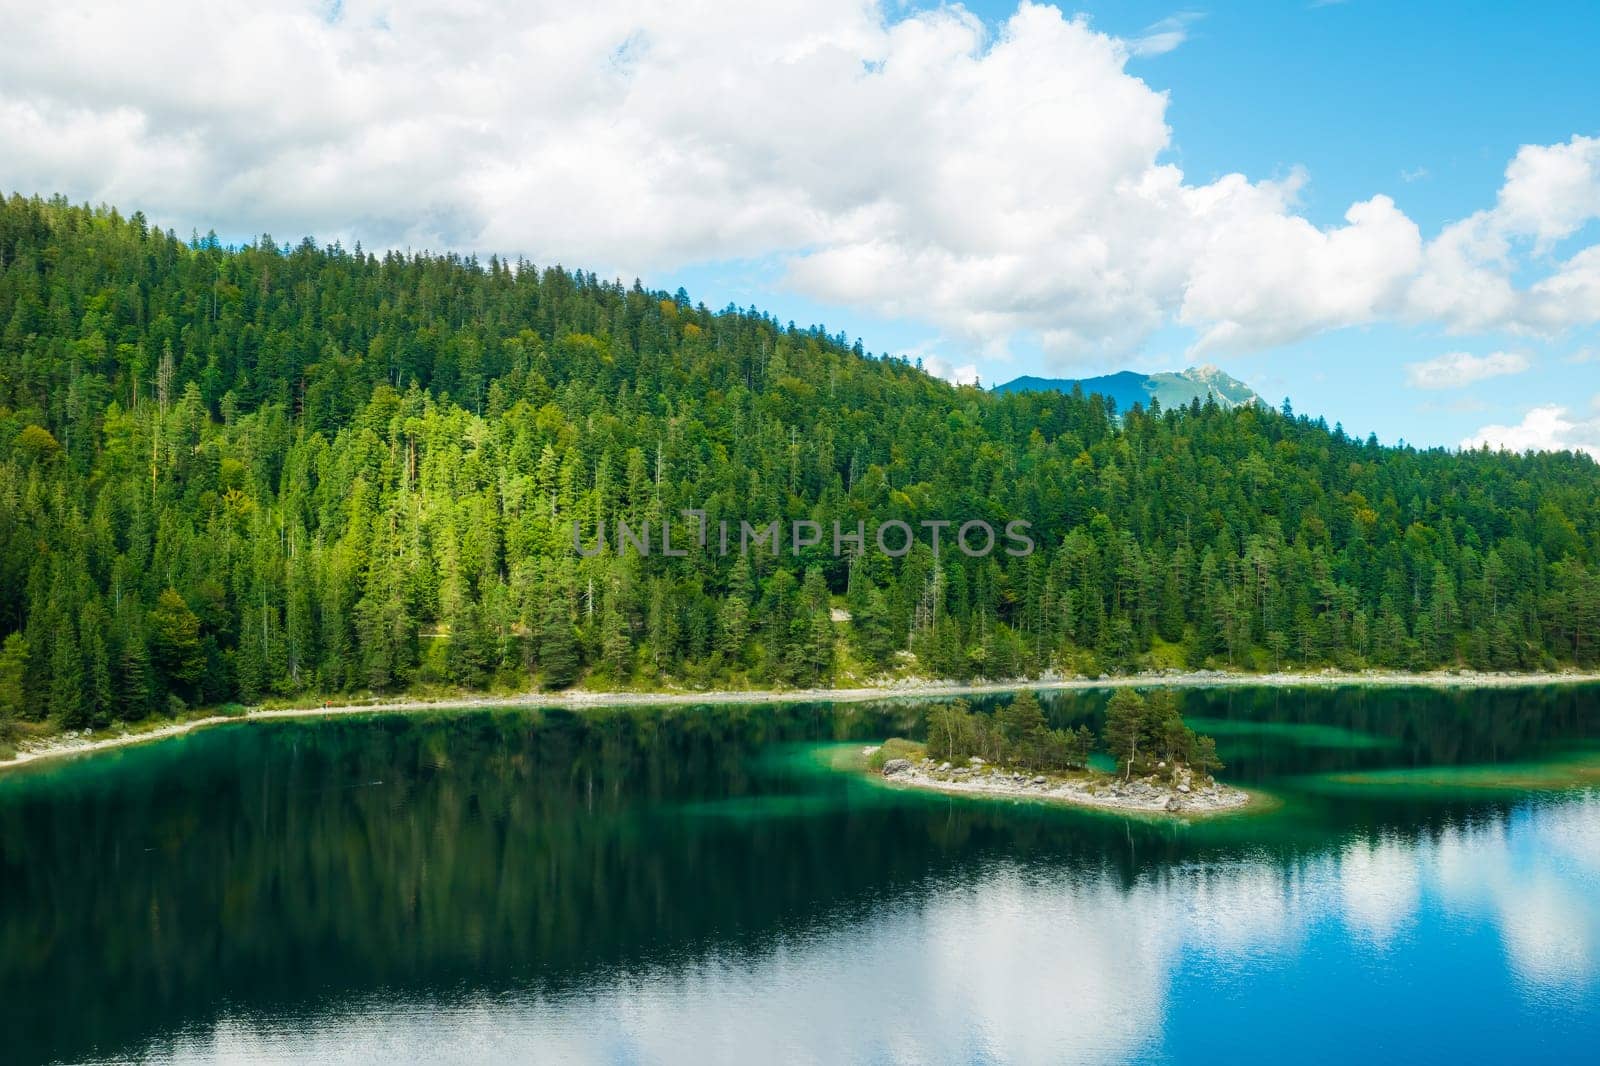 Mountains with spruce trees and clouds are reflected in a forest river. Summer landscape of a riverside.